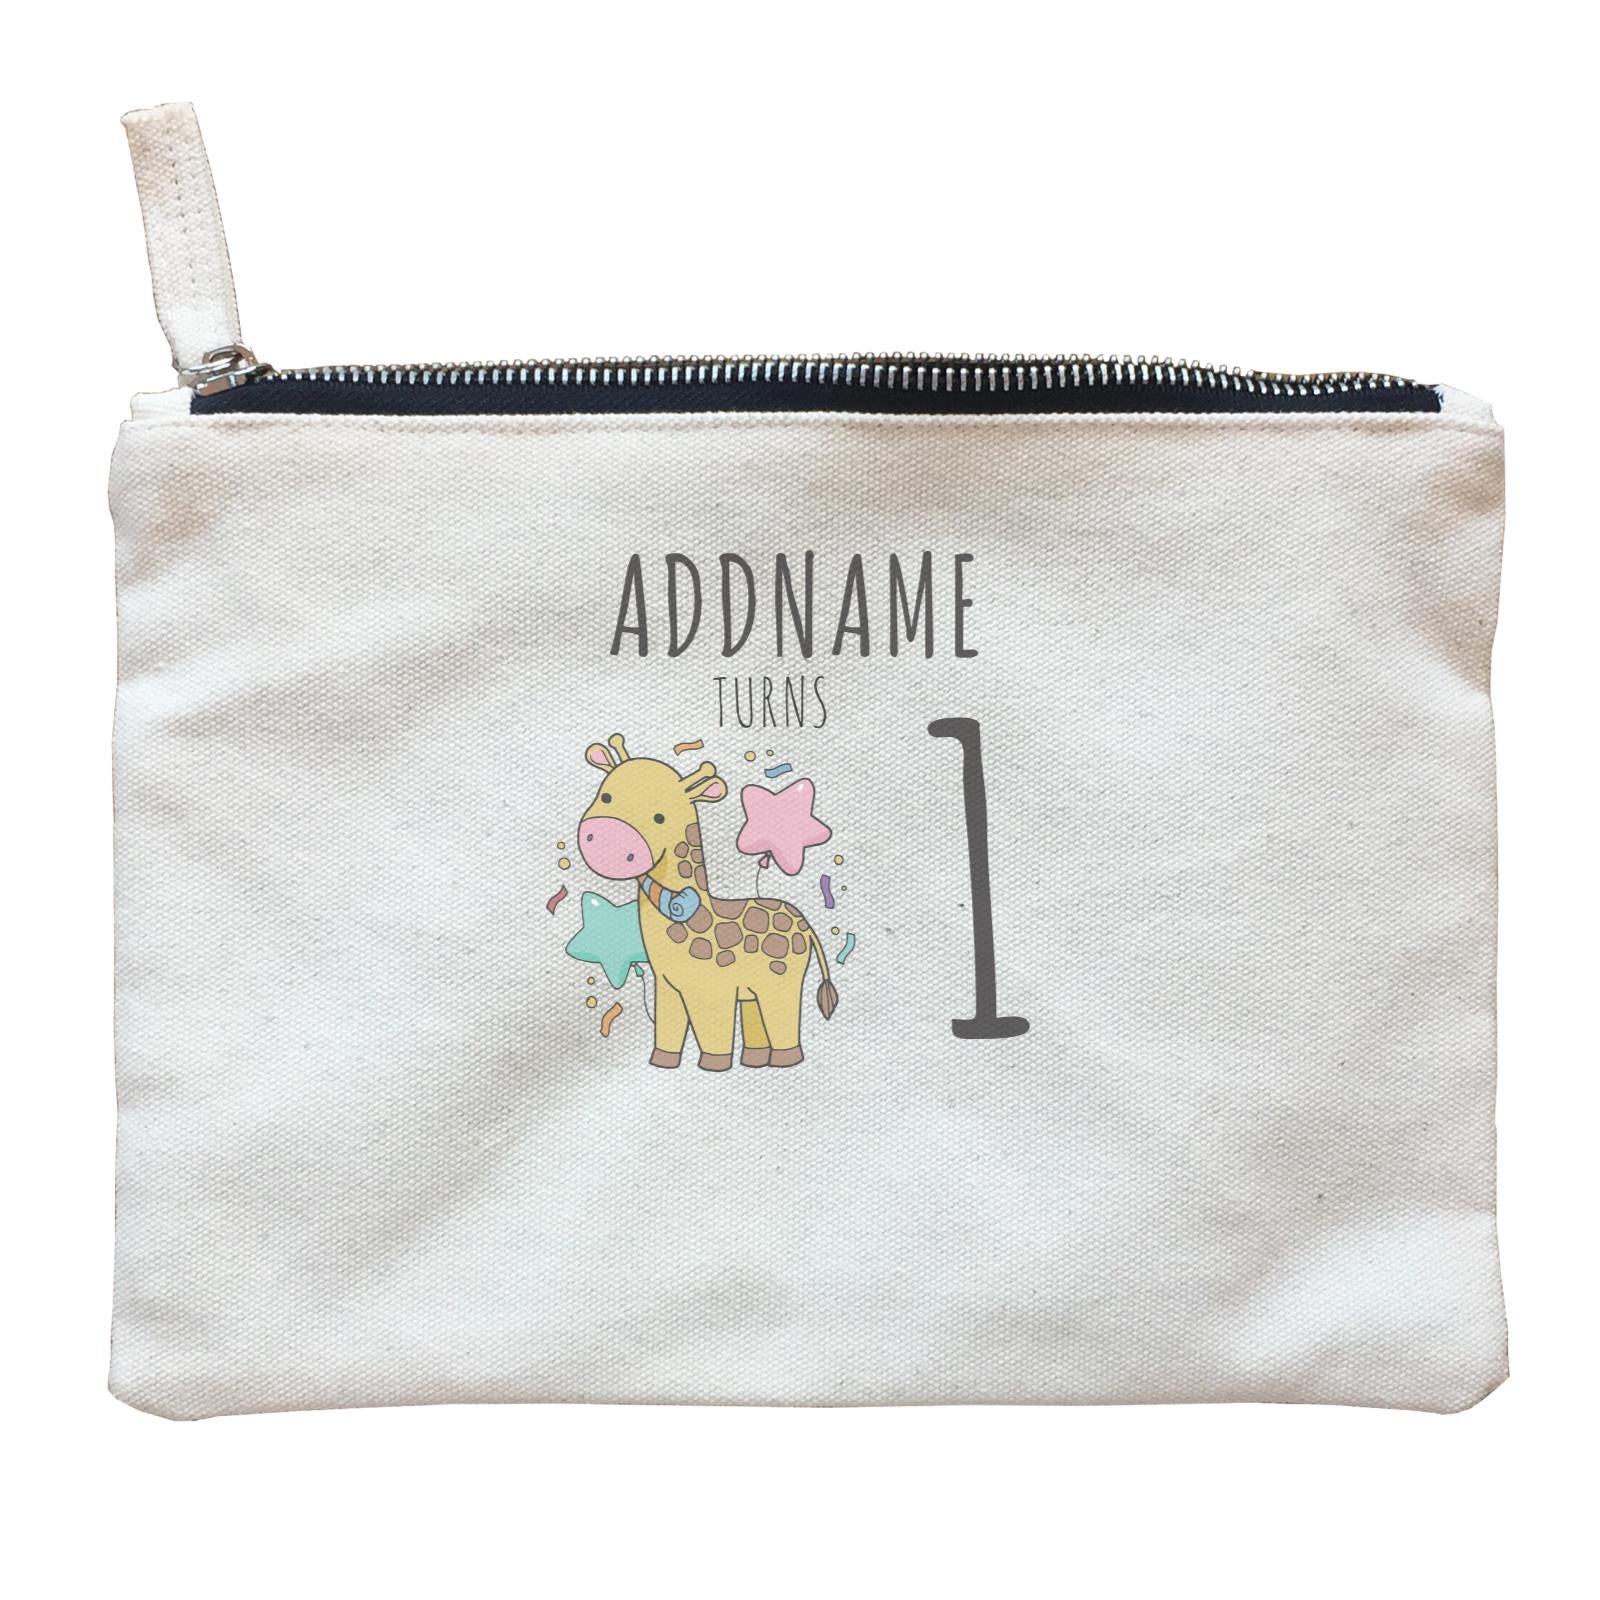 Birthday Sketch Animals Giraffe with Party Horn Addname Turns 1 Zipper Pouch